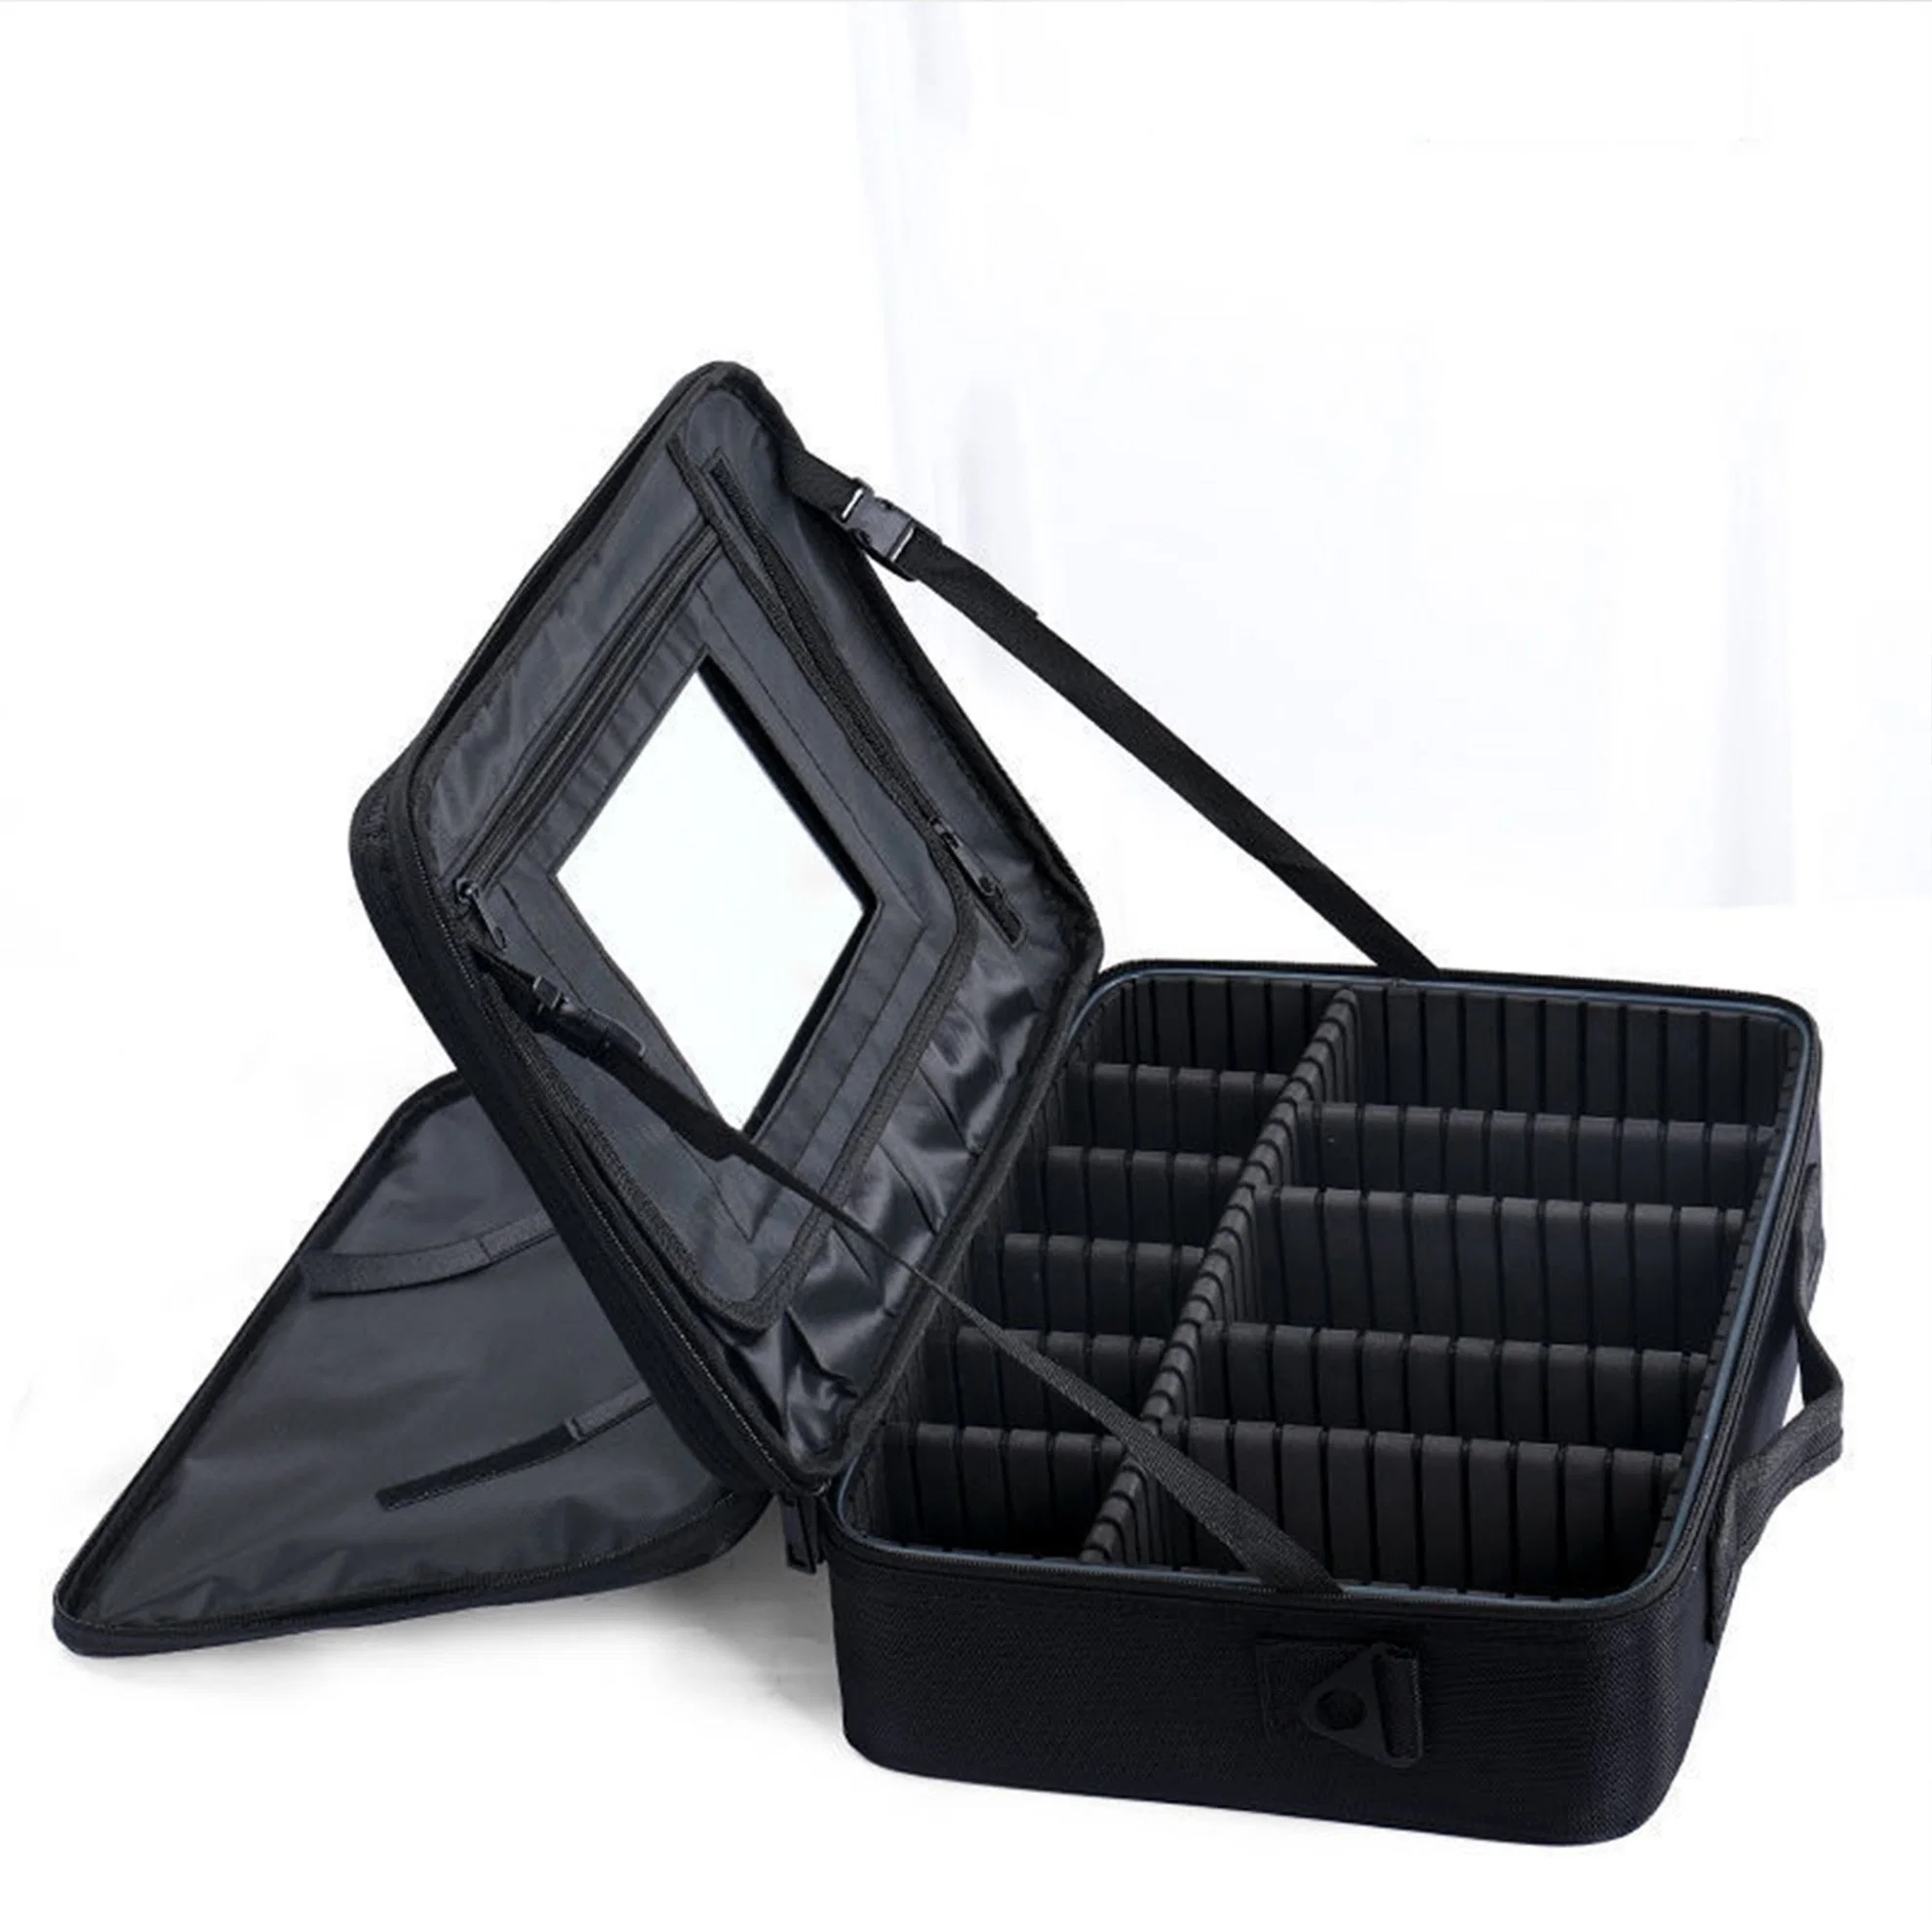 Professional Cosmetic Makeup Bag Organizer Makeup Boxes with Compartments Carry Travel Cosmetic Case